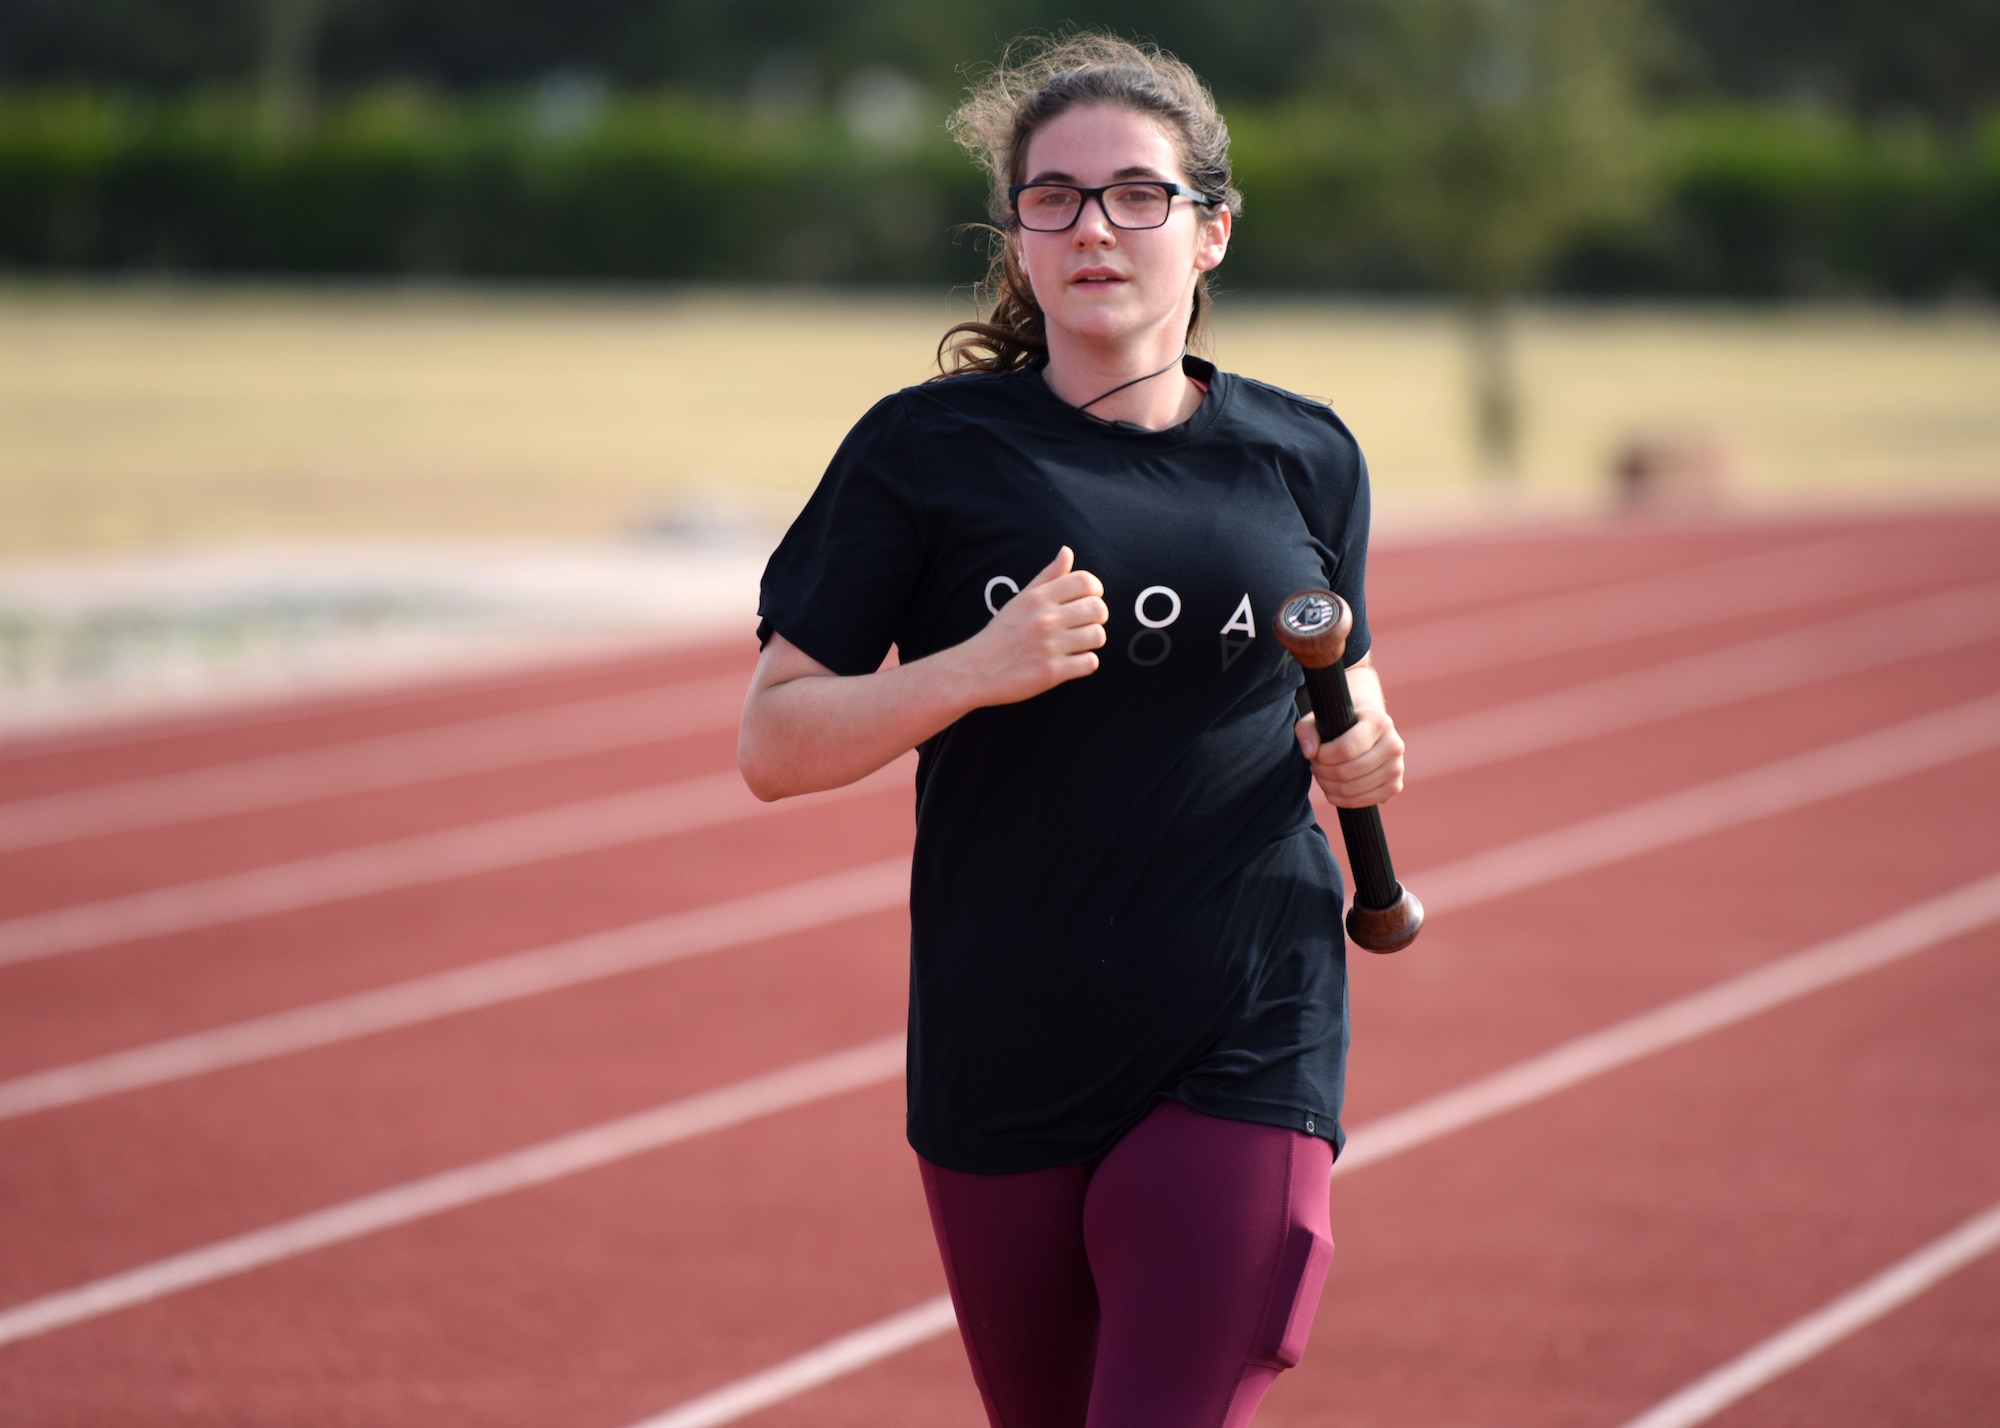 A participant runs with the Prisoner of War and Missing in Action baton during the POW-MIA 24 hour remembrance run at the Mathis Fitness Center track on Goodfellow Air Force Base, Texas, Nov. 14, 2020. Participants ran laps around the track for 24 straight hours. (U.S. Air Force photo by Airman 1st Class Ethan Sherwood)